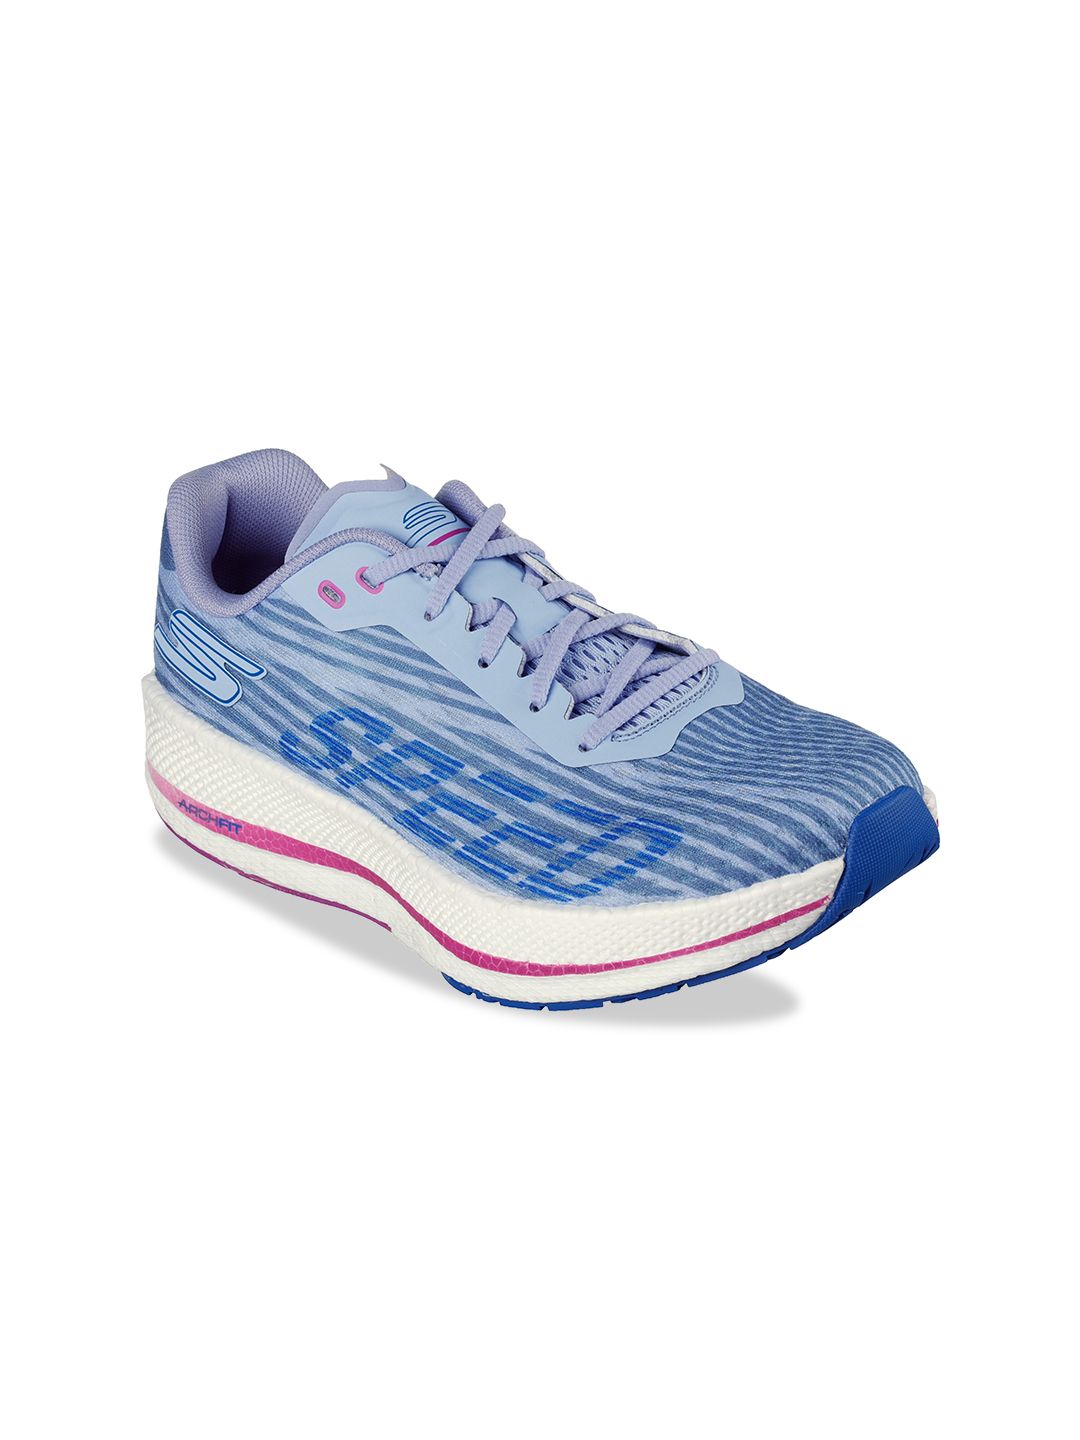 Skechers Women Blue Sports Shoes Price in India